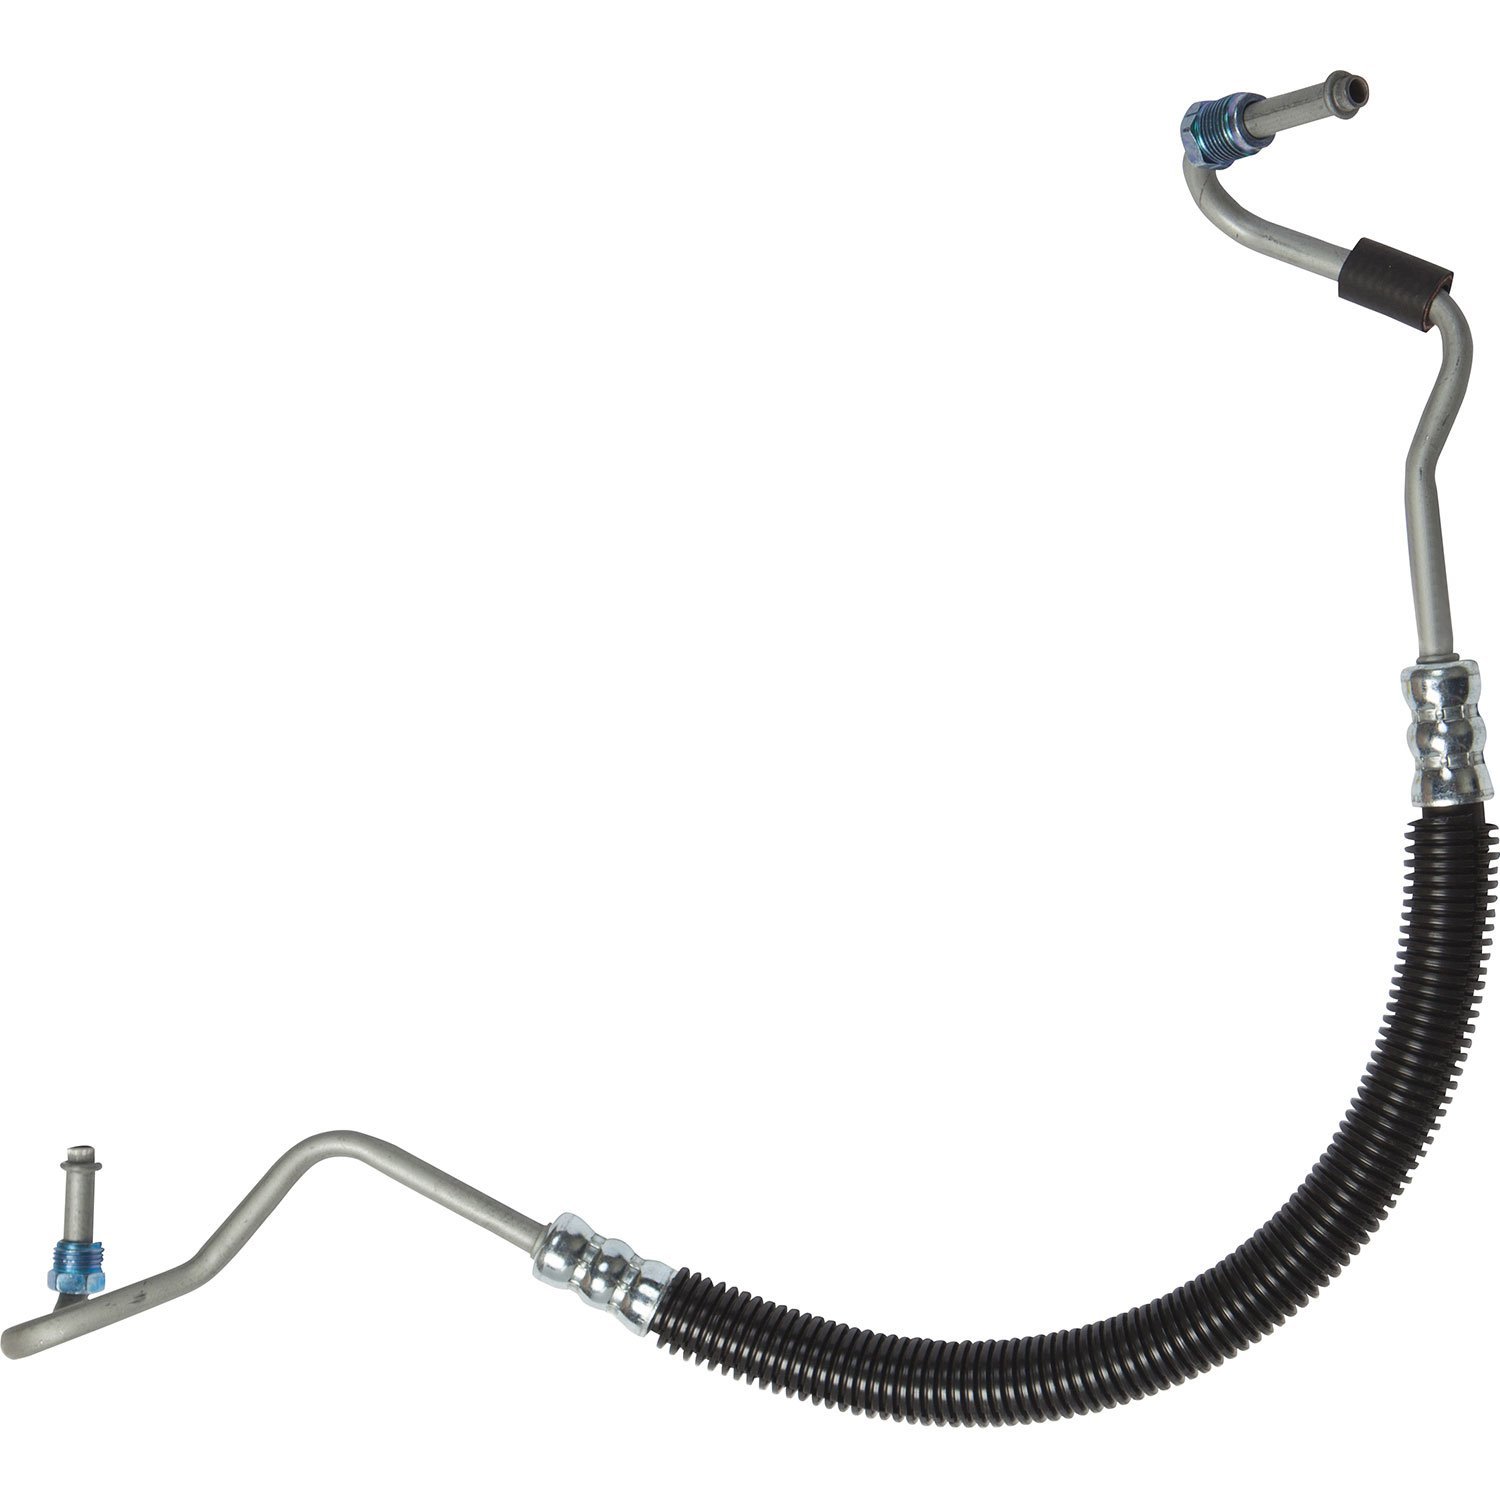 Power Steering Hose Assembly for Select 2002-2006 Cadillac, Chevrolet, GMC V8